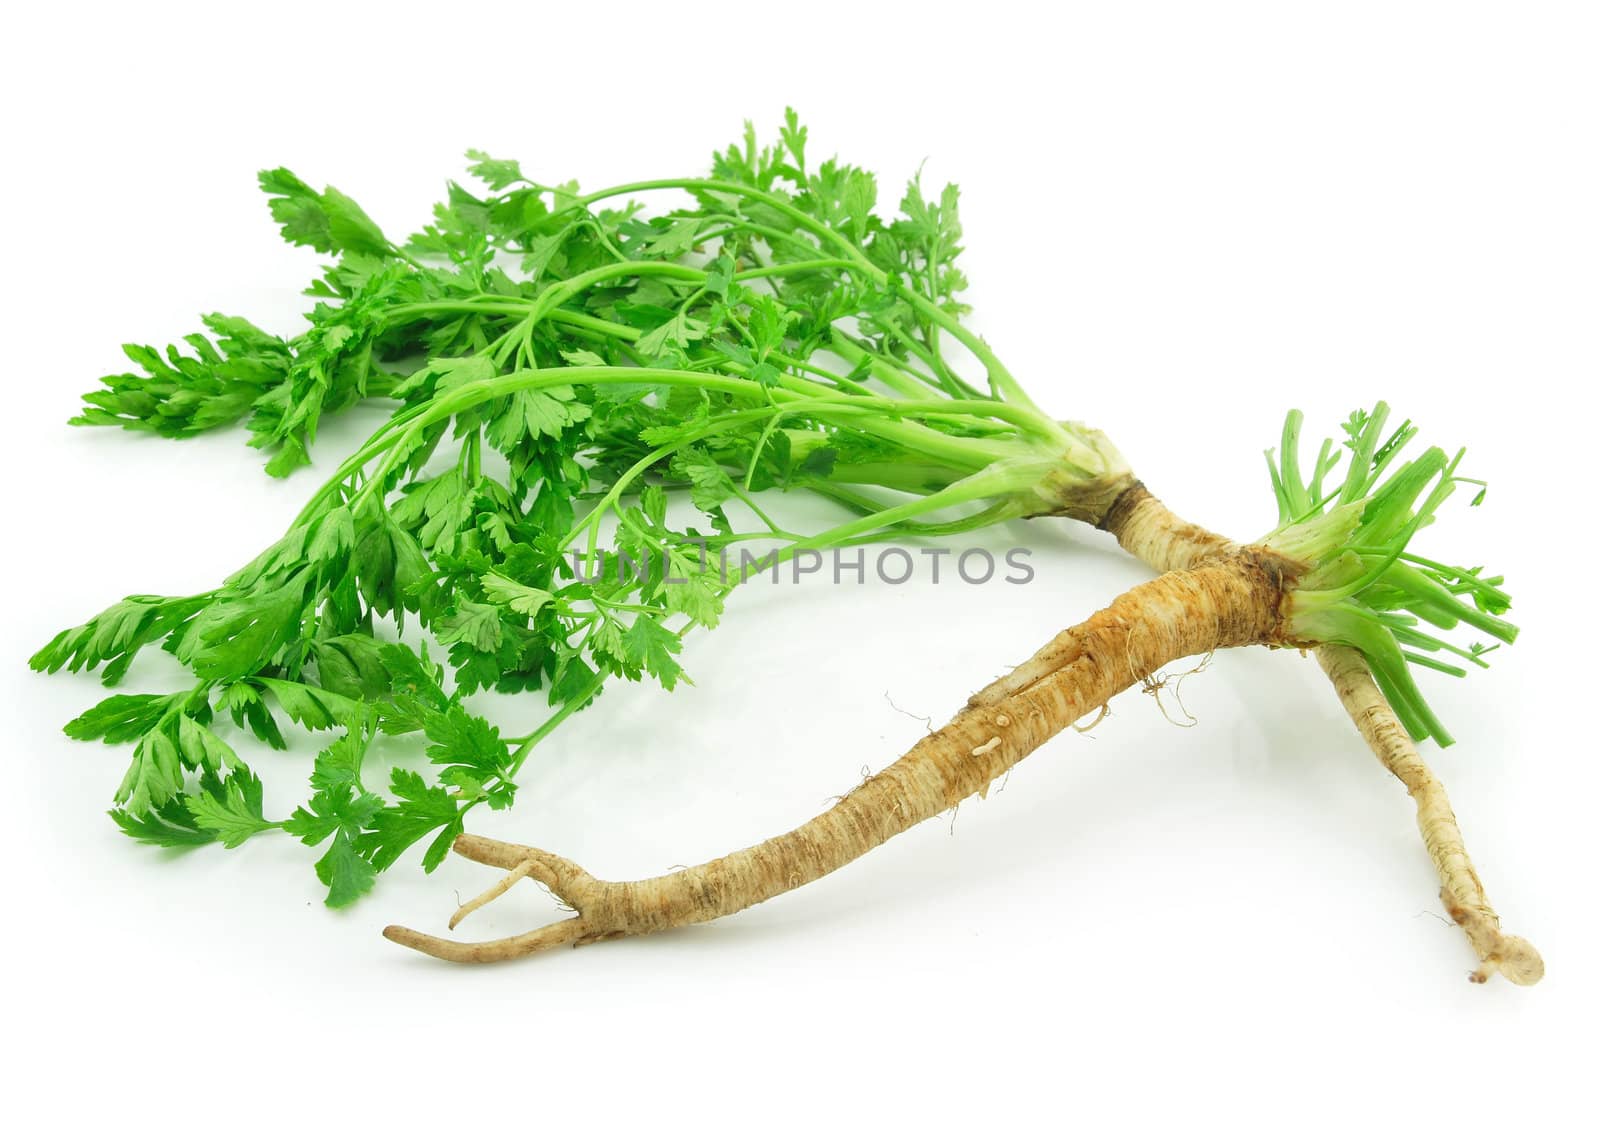 Ripe Green Parsley Isolated on White Background